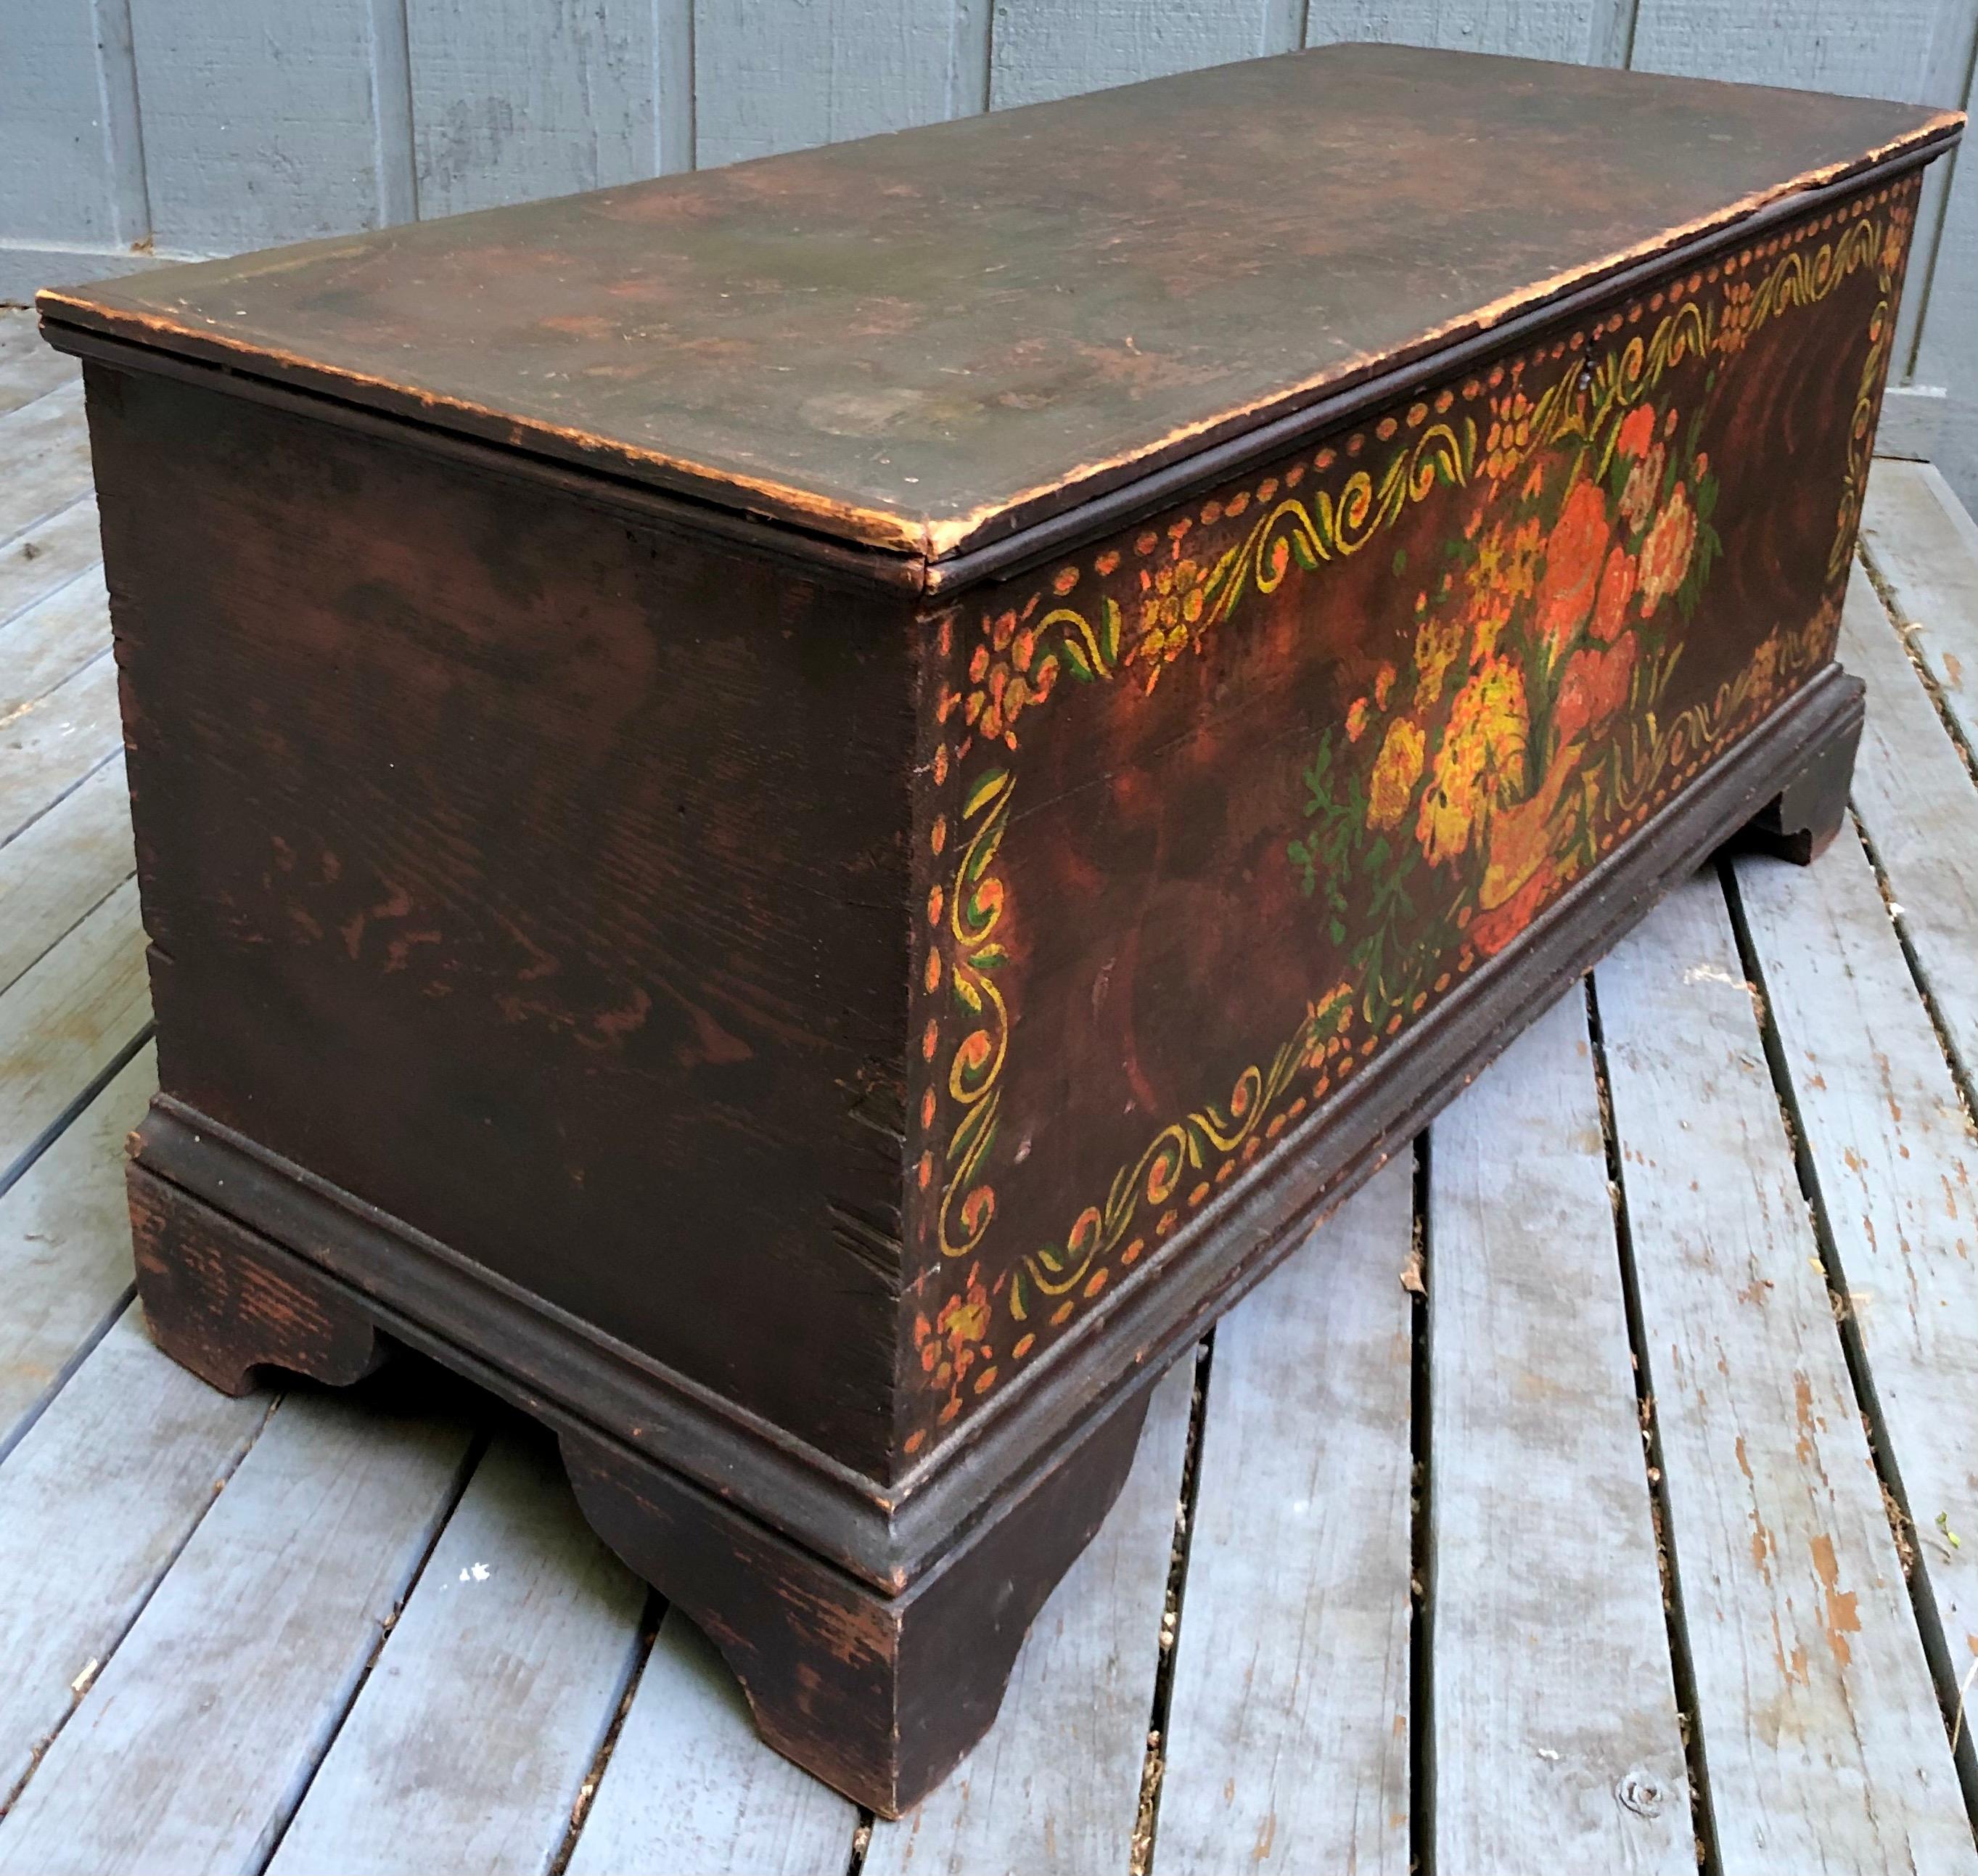 Best possible original paint decorated surface featuring a strong bracket base and very desirable proportions. The inside top inscribed E. V. Wormer and E.V.W.M.M.W. Dating 1830s to 1840s.
There are no noticeable restorations, most likely very